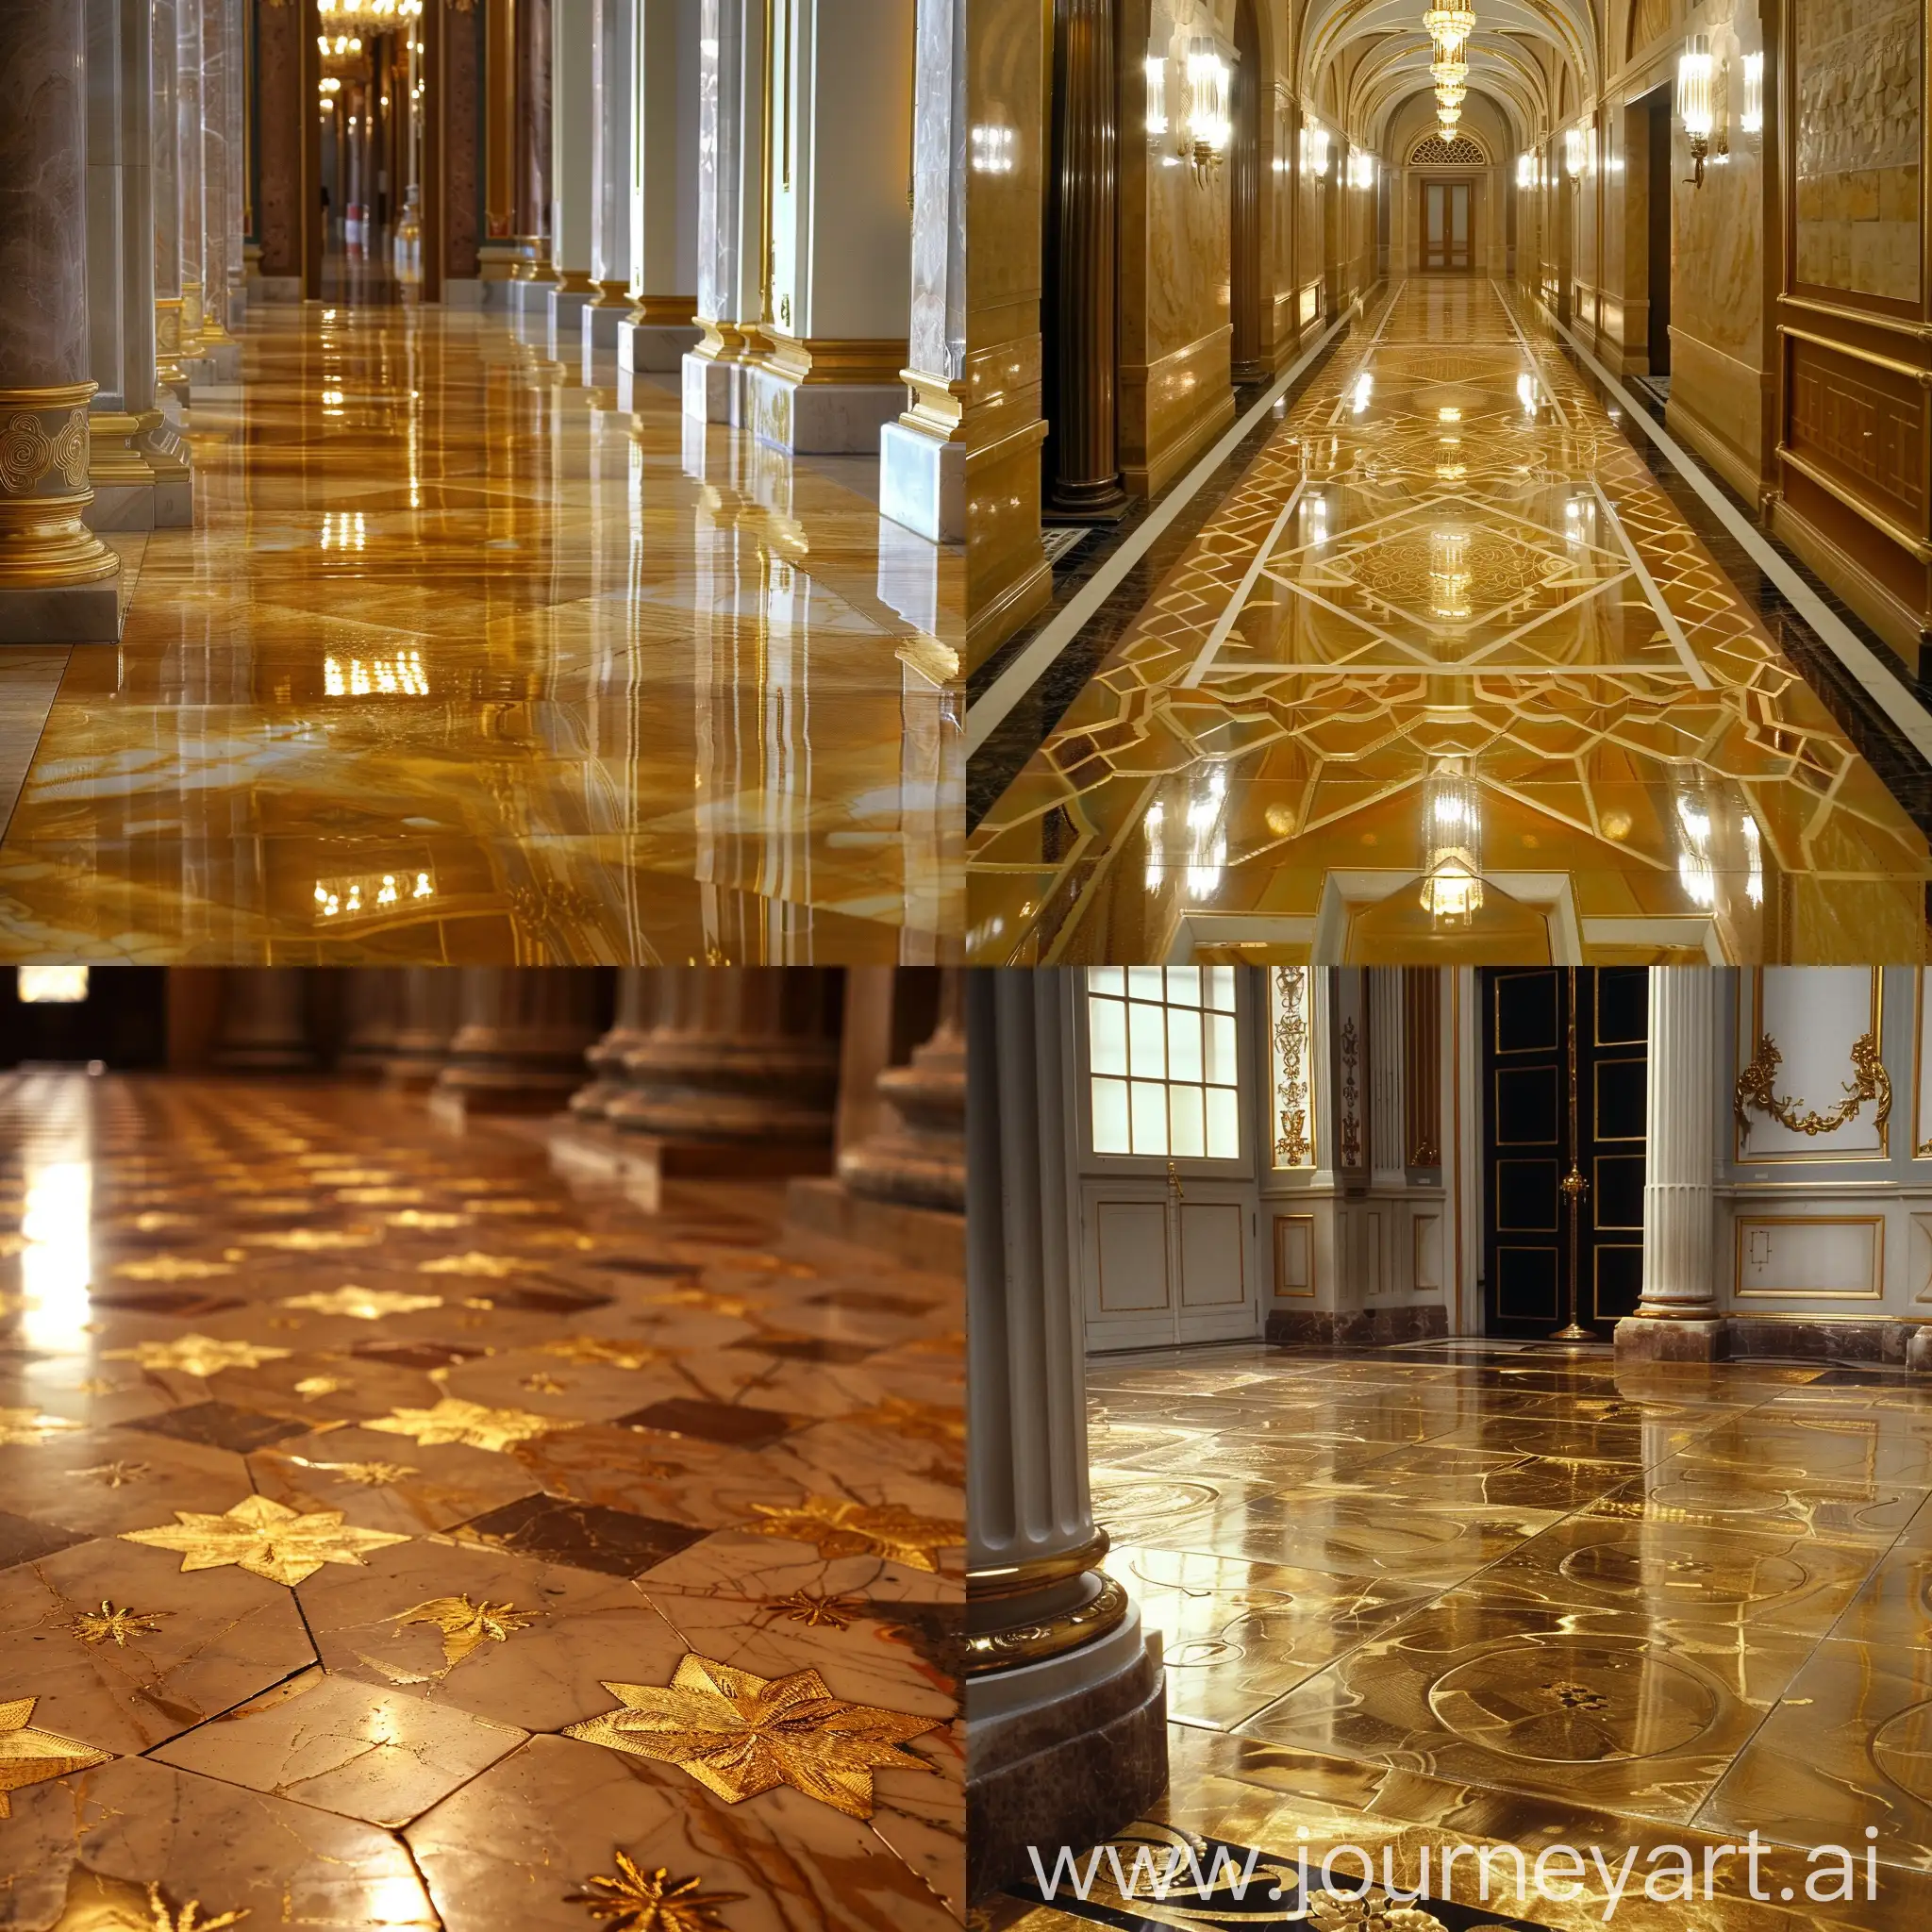 Golden-Floor-Reflections-Abstract-Artistic-Vision-of-Harmony-and-Tranquility